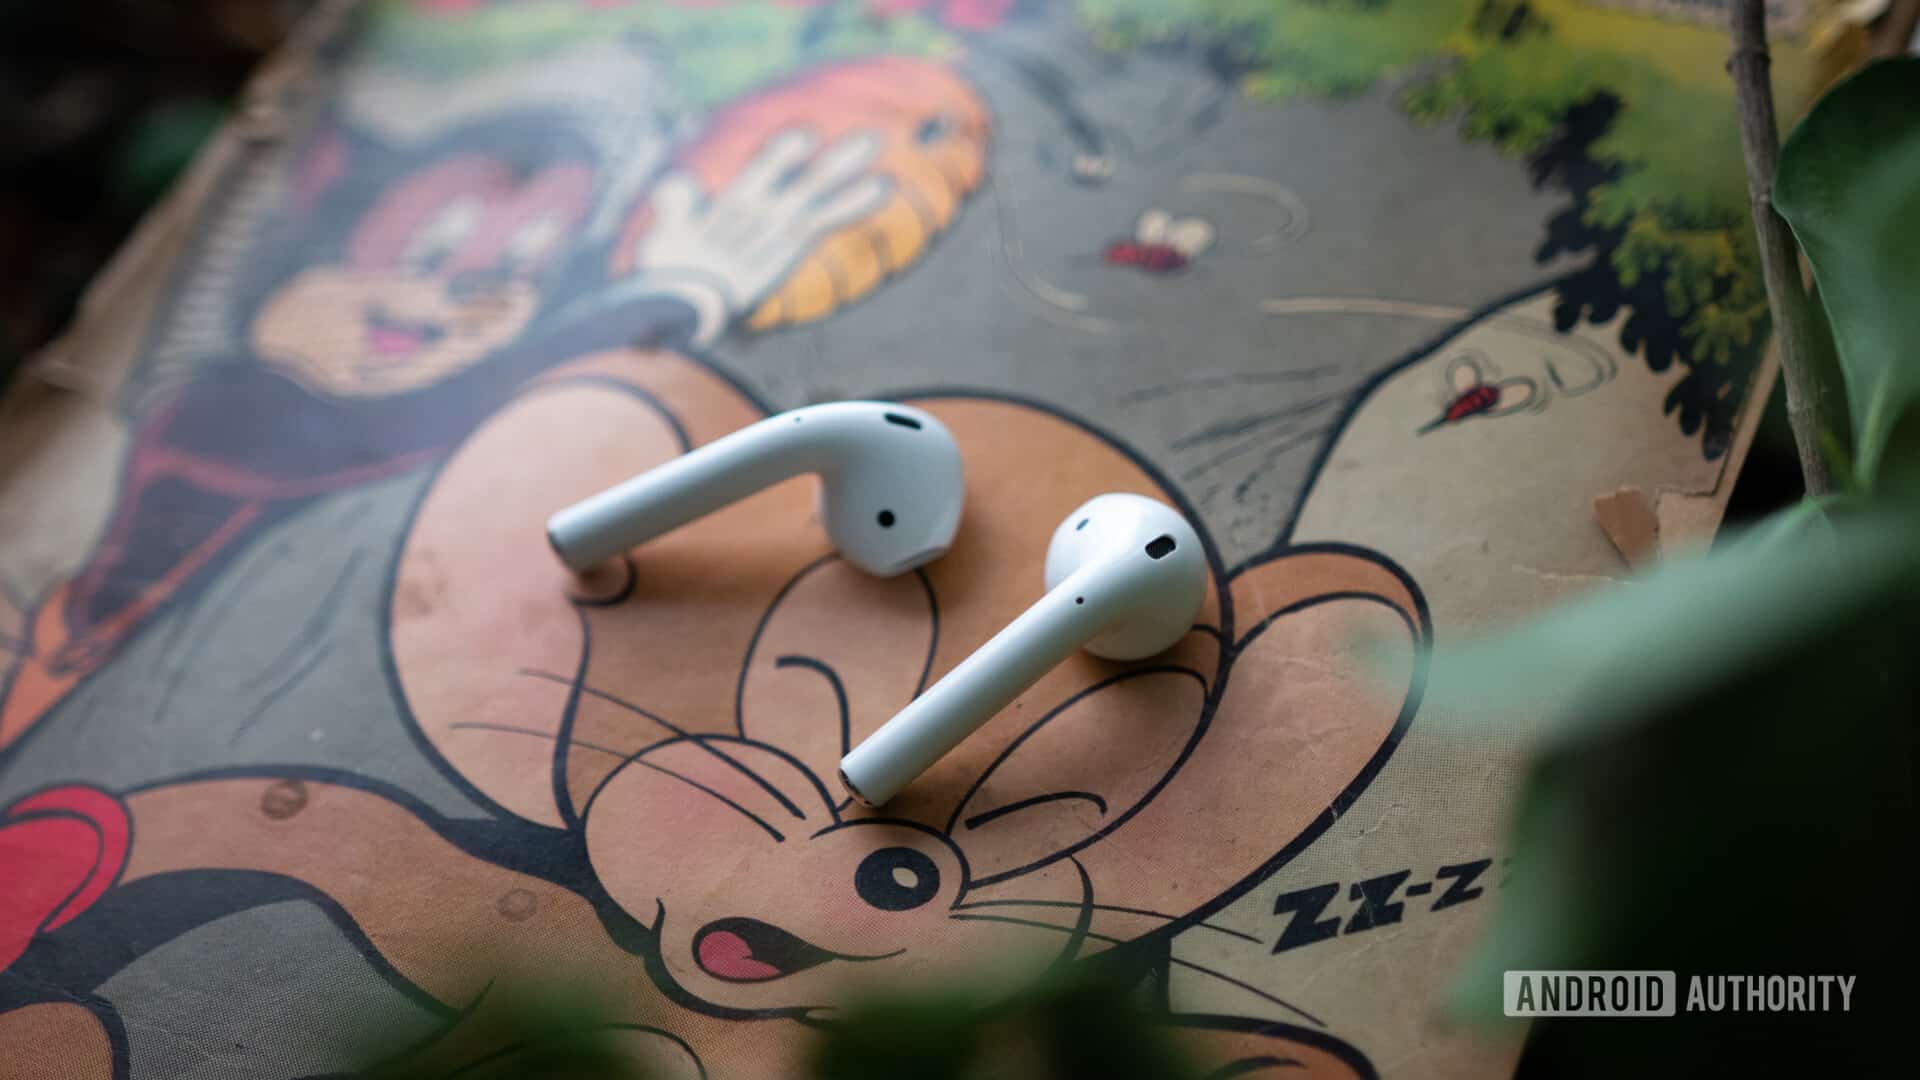 New AirPods 2019 on comic book - are Airpods worth it